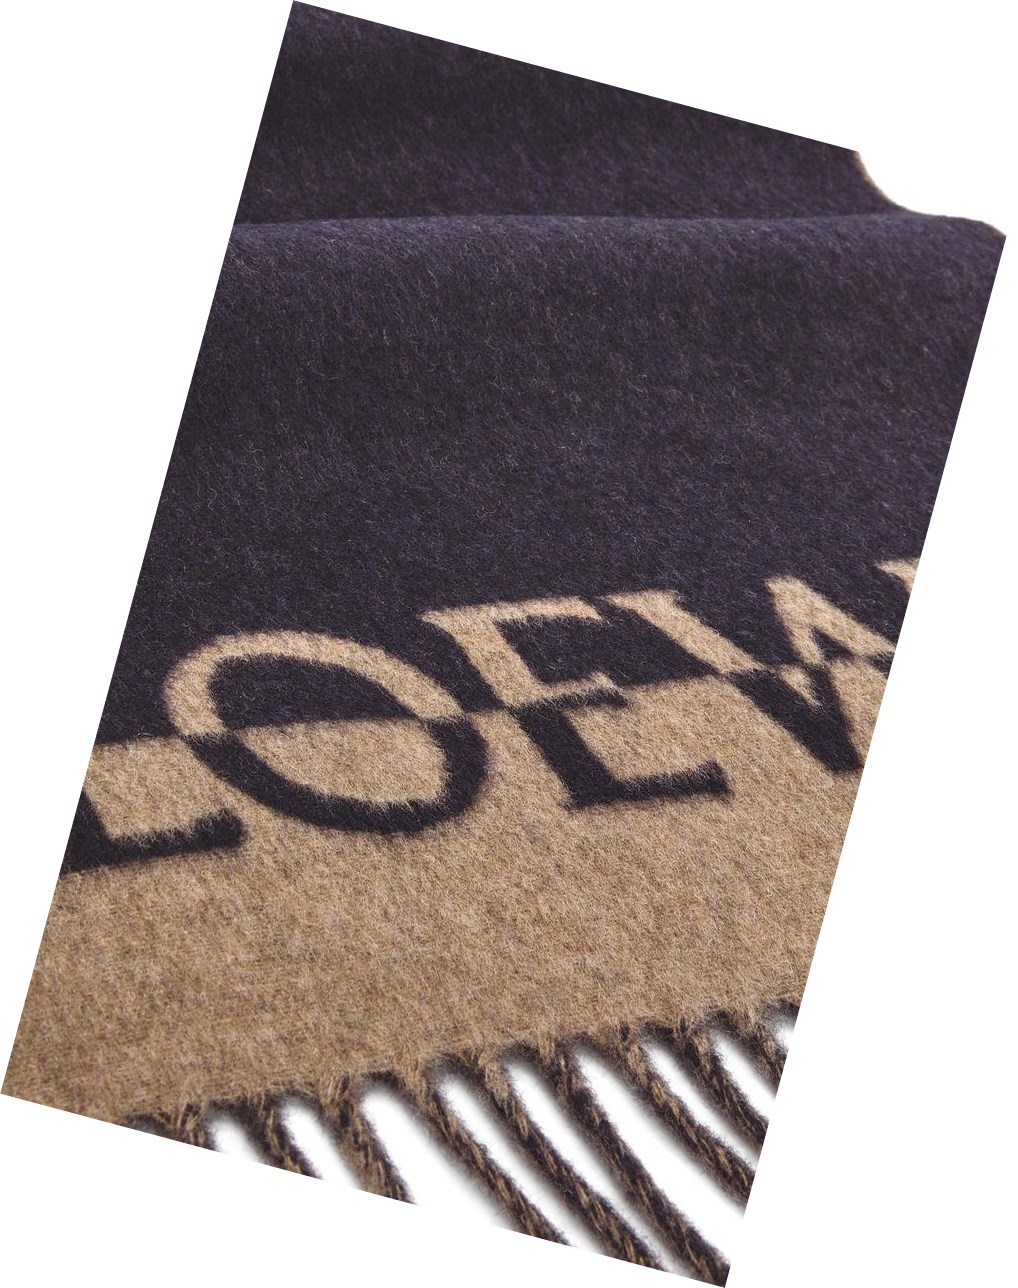 Loewe Bicolour LOEWE scarf in wool and cashmere Navy Blue / Camel | LW1694253